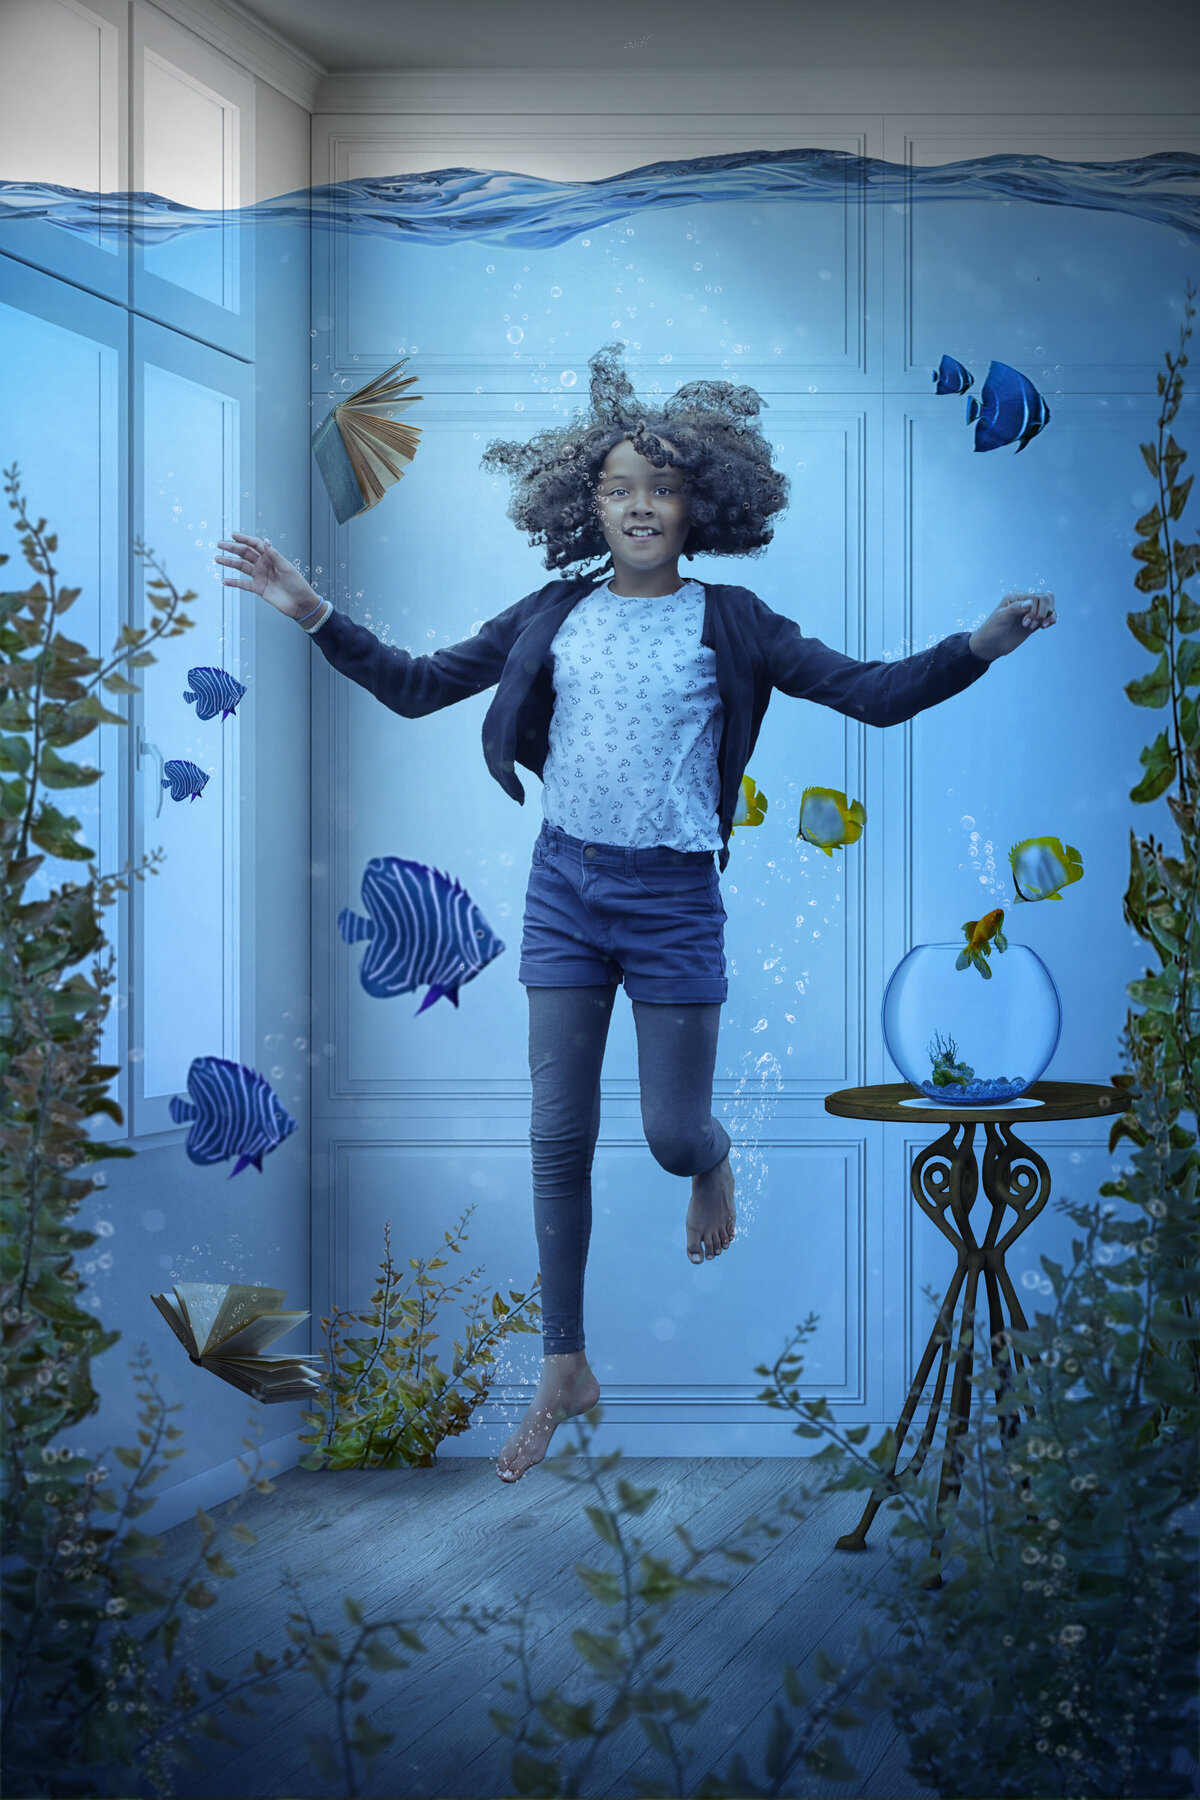 Girl floating underwater with fish in a room